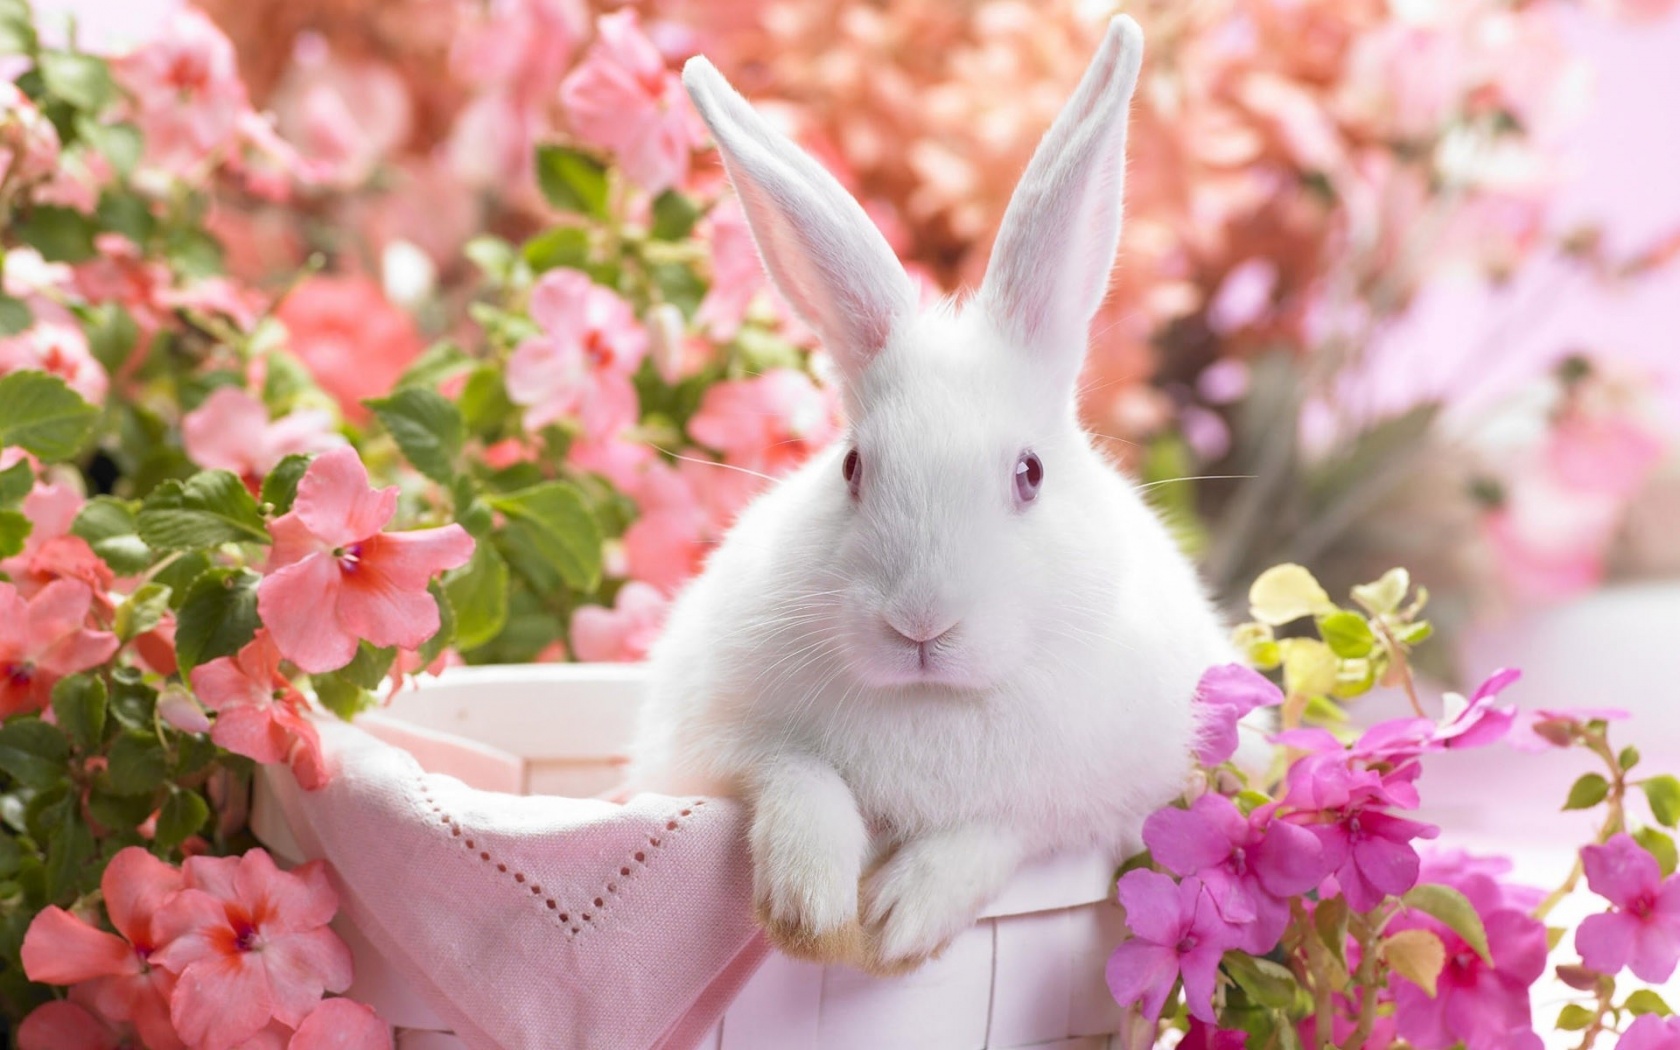 Easter Bunny Holiday Wallpaper